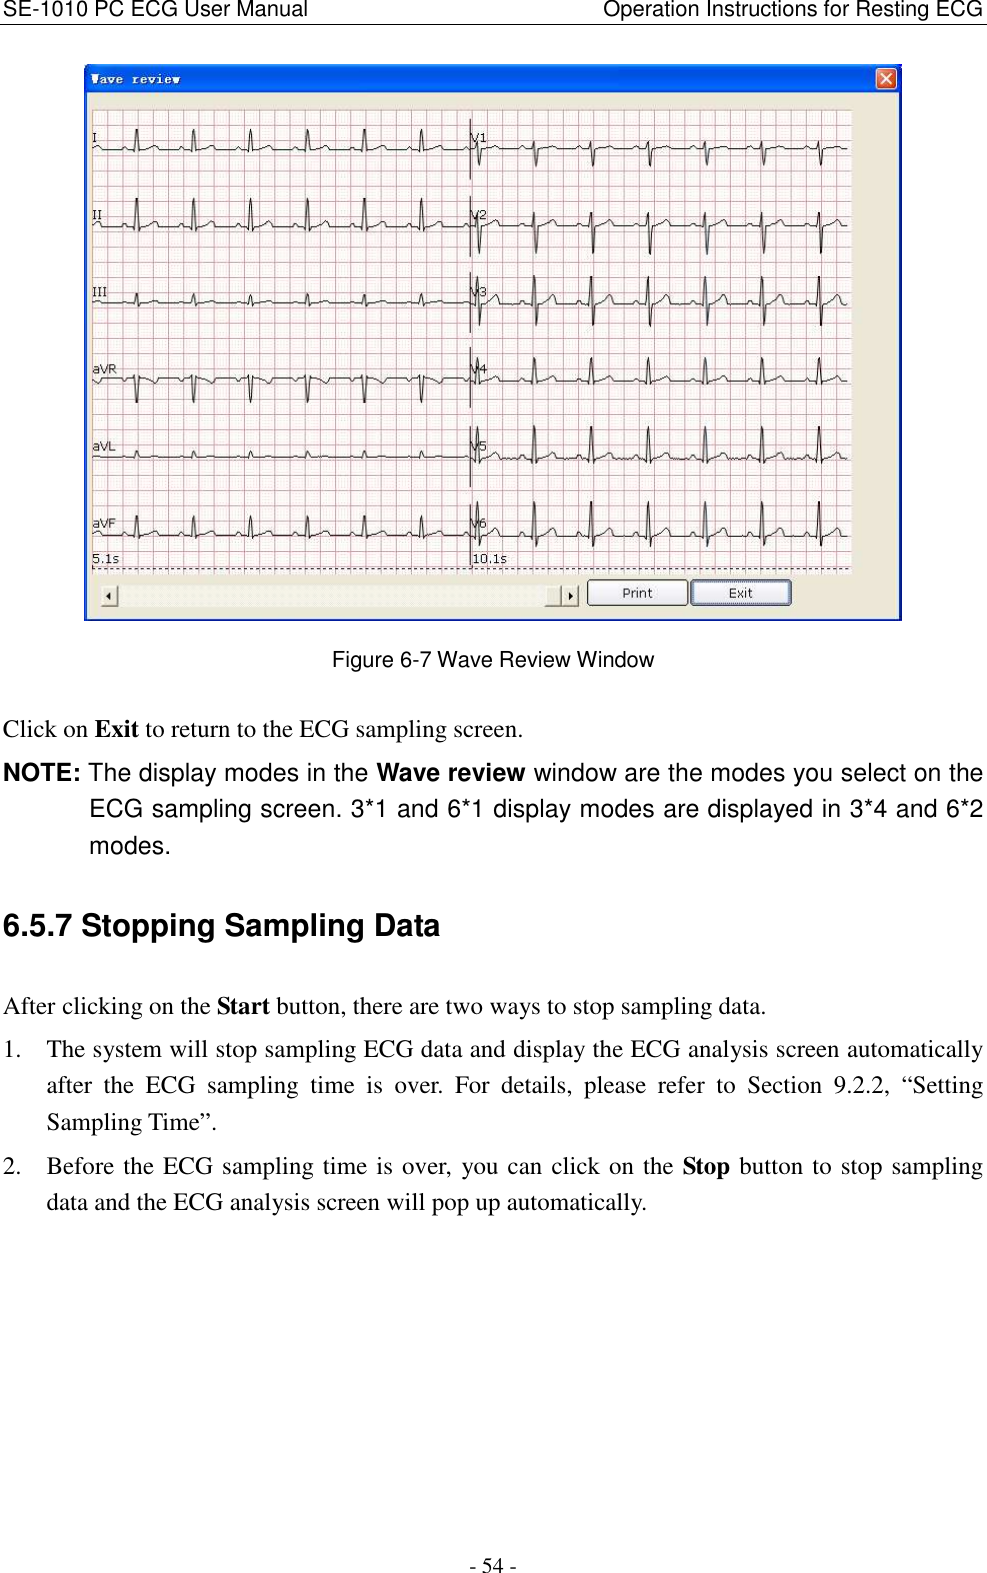 SE-1010 PC ECG User Manual                                                      Operation Instructions for Resting ECG - 54 -  Figure 6-7 Wave Review Window Click on Exit to return to the ECG sampling screen. NOTE: The display modes in the Wave review window are the modes you select on the ECG sampling screen. 3*1 and 6*1 display modes are displayed in 3*4 and 6*2 modes. 6.5.7 Stopping Sampling Data After clicking on the Start button, there are two ways to stop sampling data. 1. The system will stop sampling ECG data and display the ECG analysis screen automatically after  the  ECG  sampling  time  is  over.  For  details,  please  refer  to  Section  9.2.2,  “Setting Sampling Time”. 2. Before the ECG sampling time is over, you can click on the Stop button to stop sampling data and the ECG analysis screen will pop up automatically. 